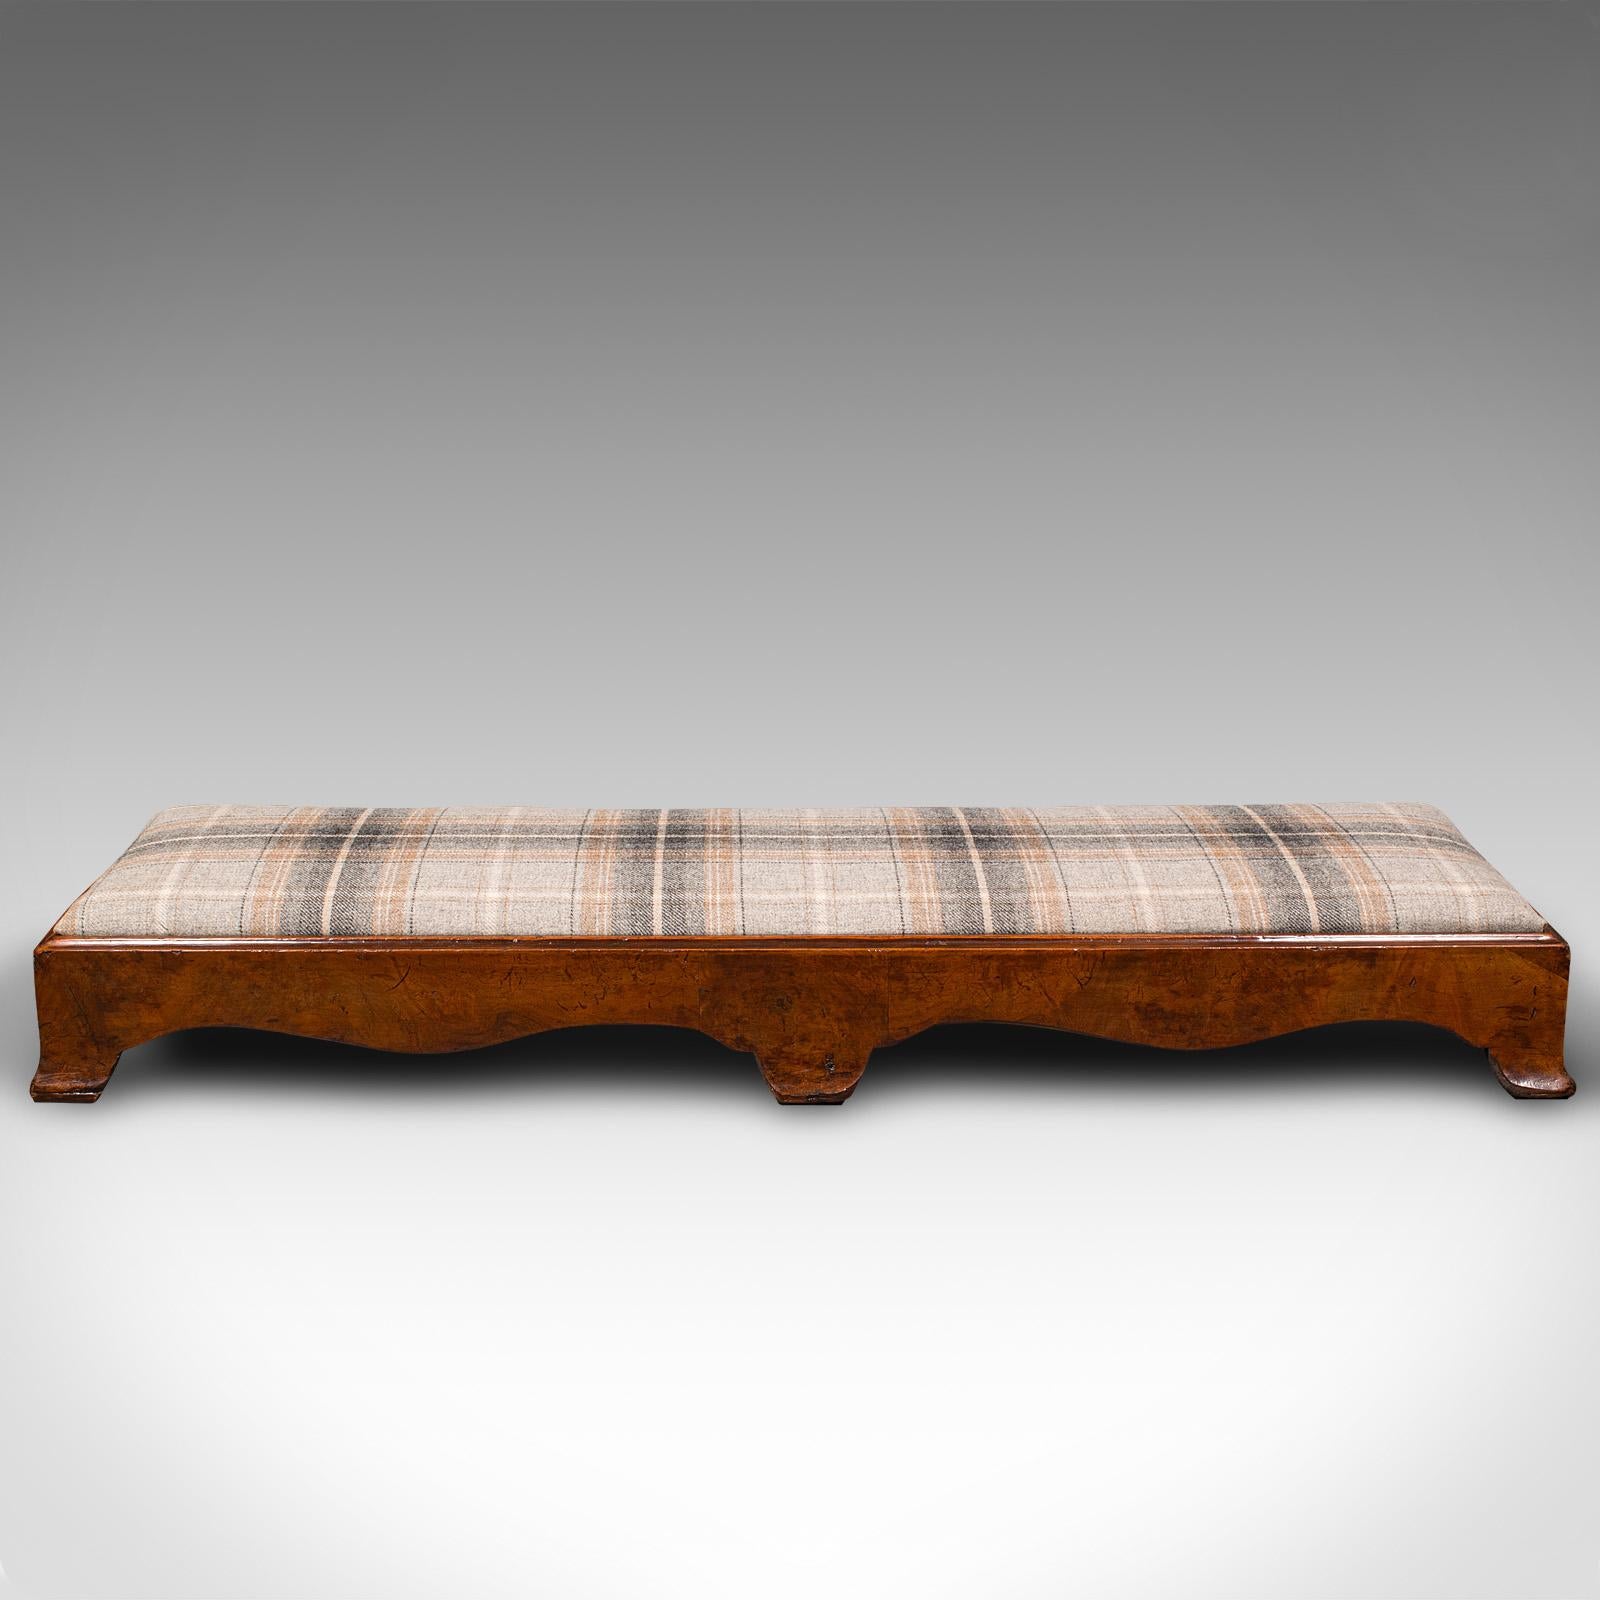 This is an antique carriage stool. An English, flame mahogany and tweed upholstered raised fireside rest, dating to the Georgian period, circa 1780.

Support weary legs in tasteful style with this appealing Georgian rest
Displays a desirable aged